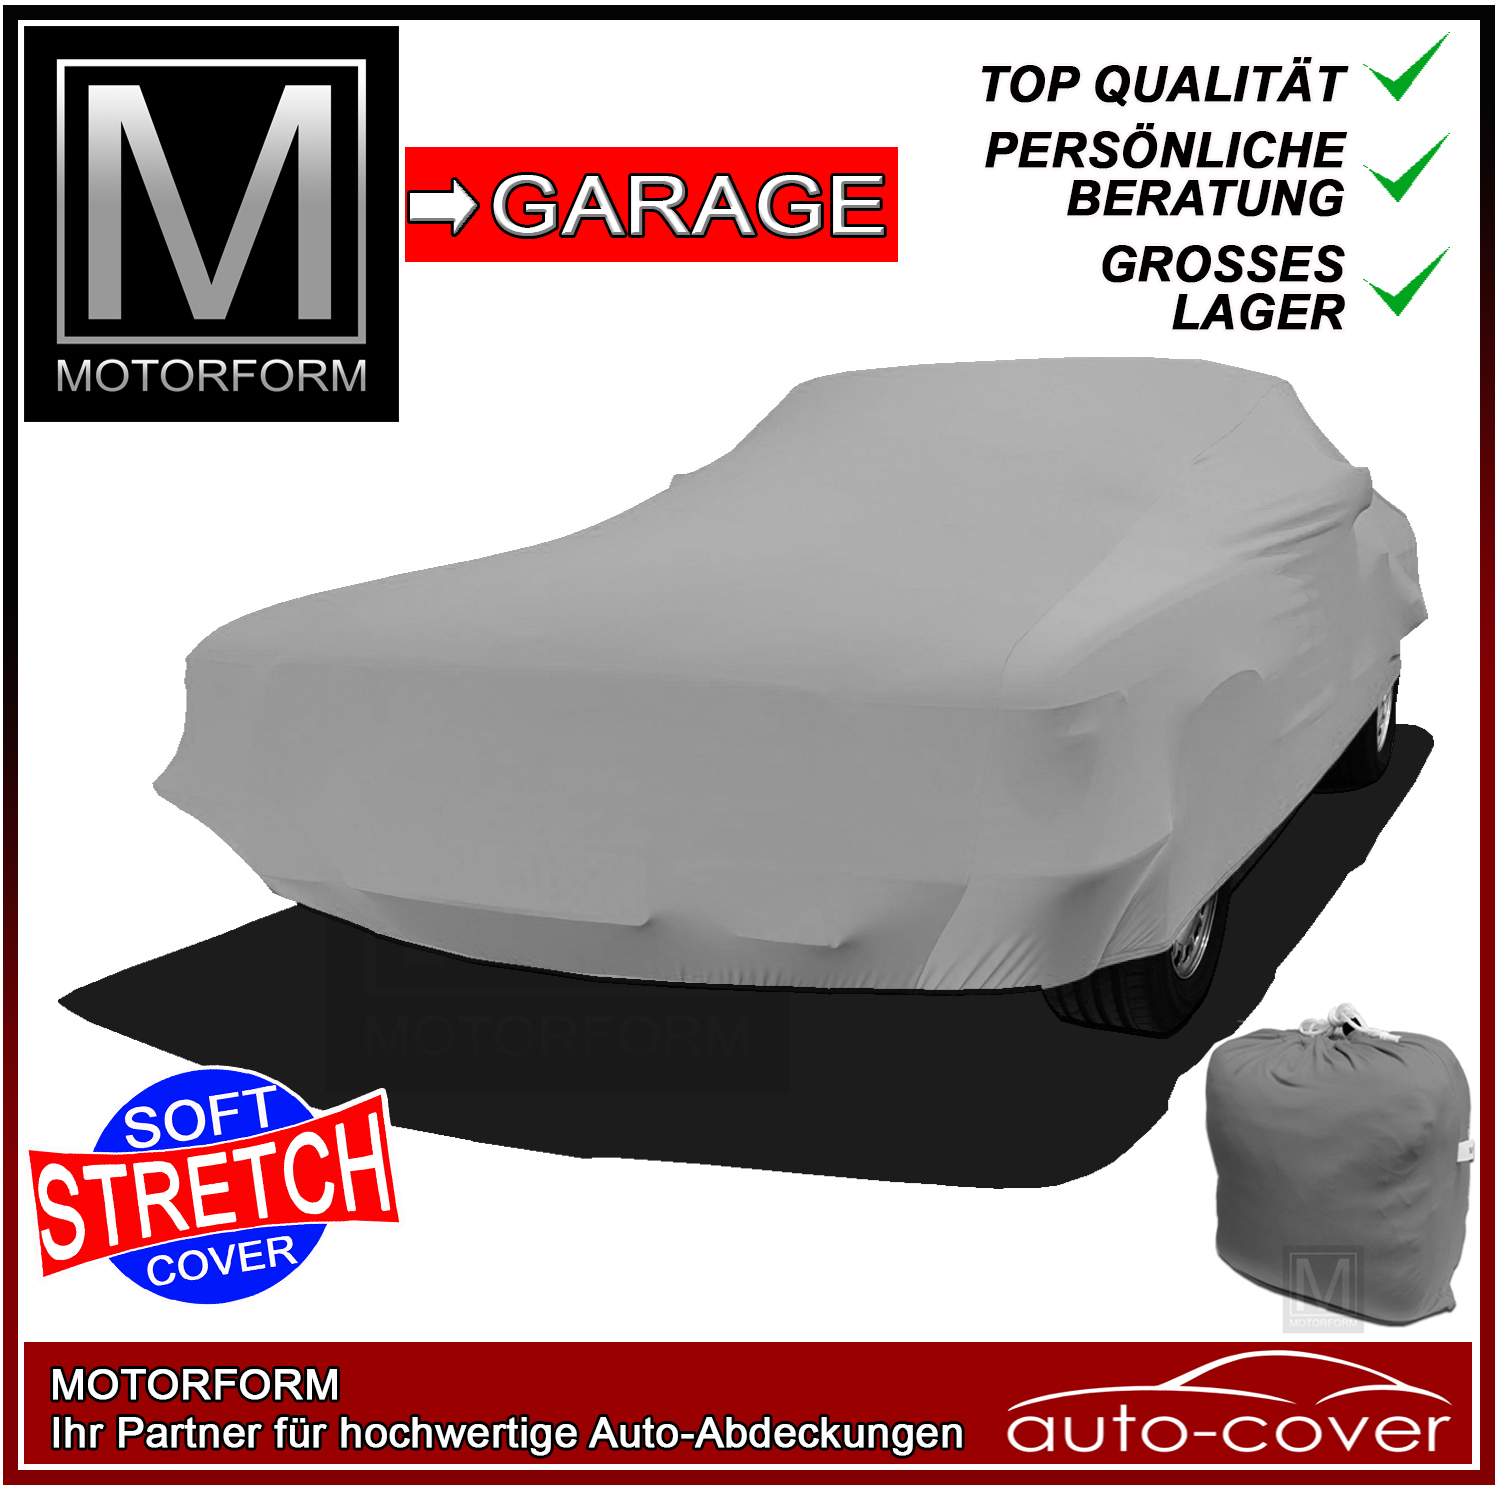 Grey Super Stretchy Cover for Mercedes 280S-450SEL W116 SEL W116